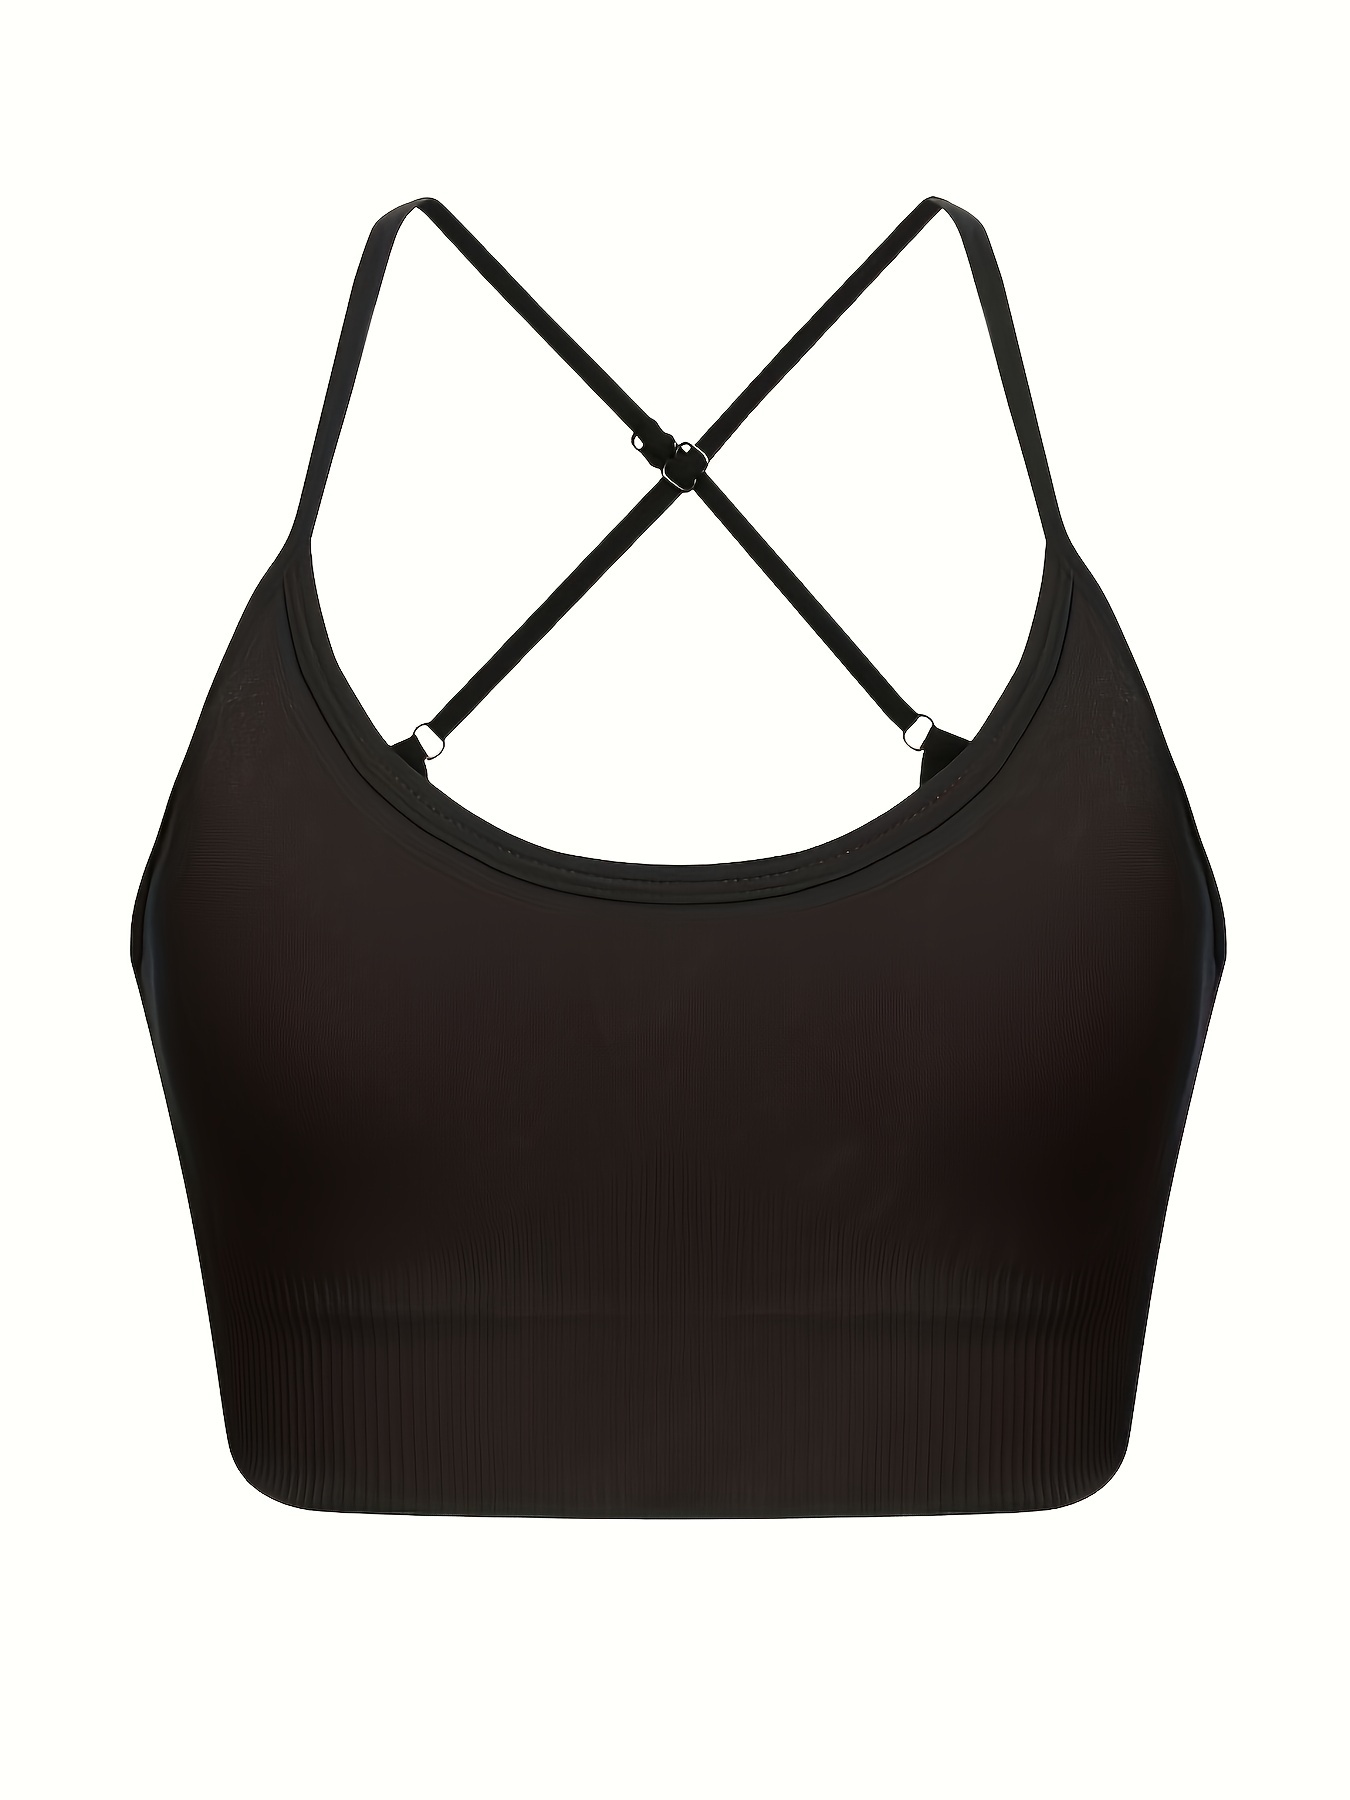 Bodychum 2 Pcs Sports Bras for Women Criss-Cross Back Sports Bars Workout  Tops Sexy Strappy Sports Bras Halter Top for Yoga Gym 